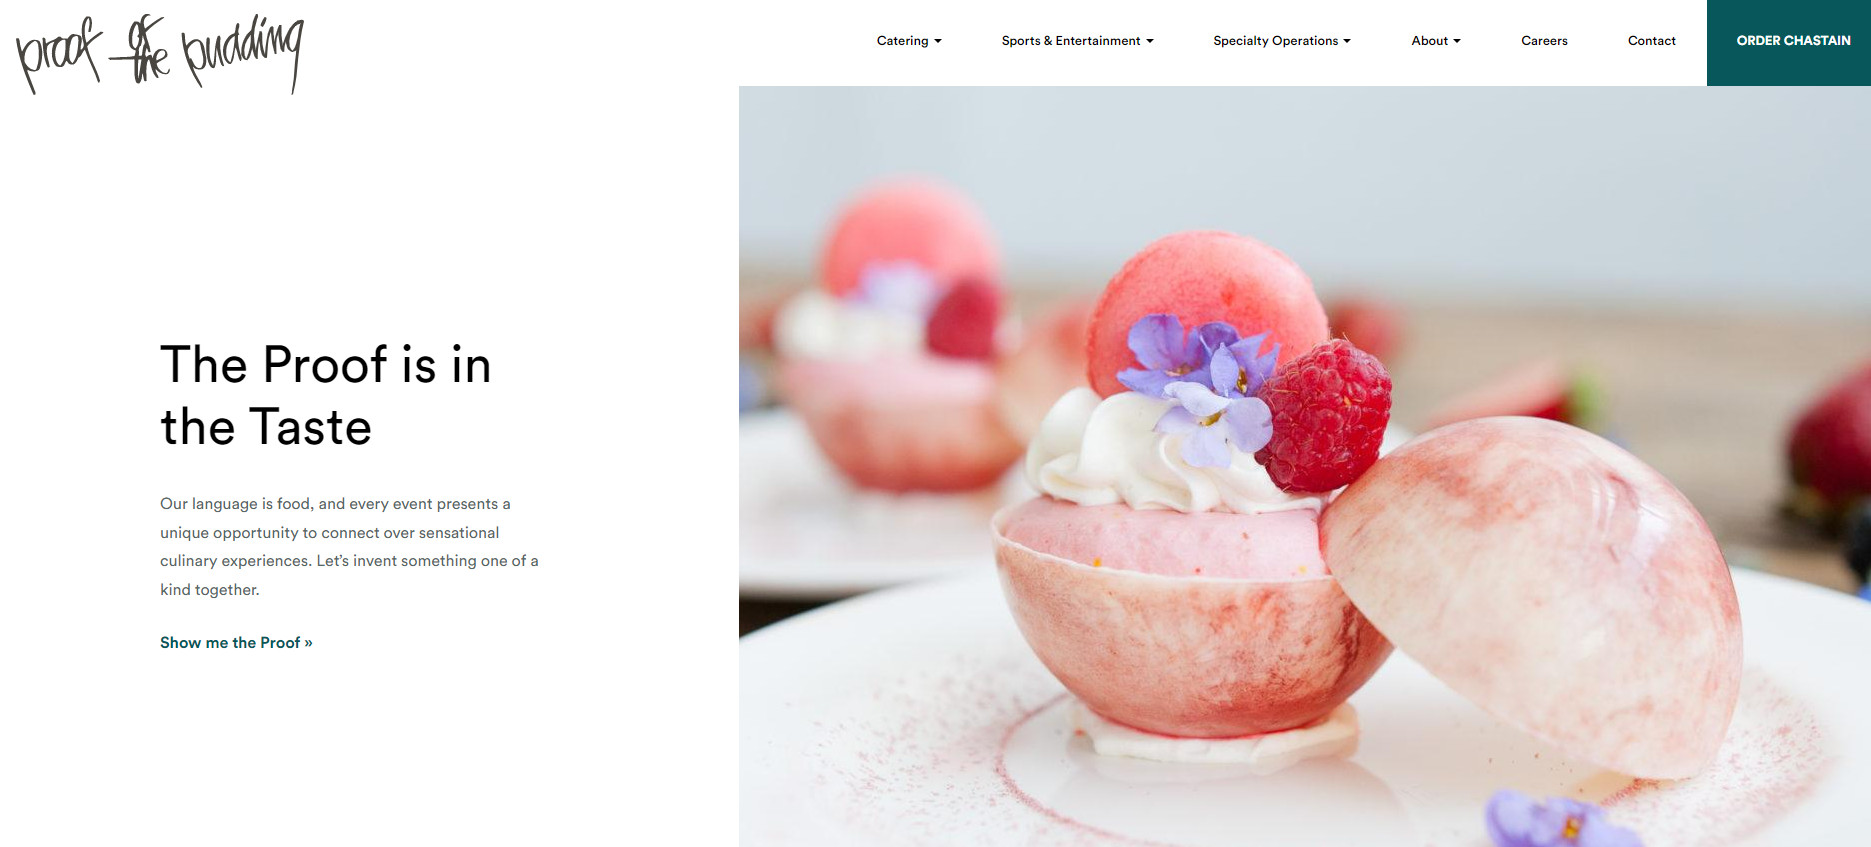 best catering websites example Flour Bakery + Cafe